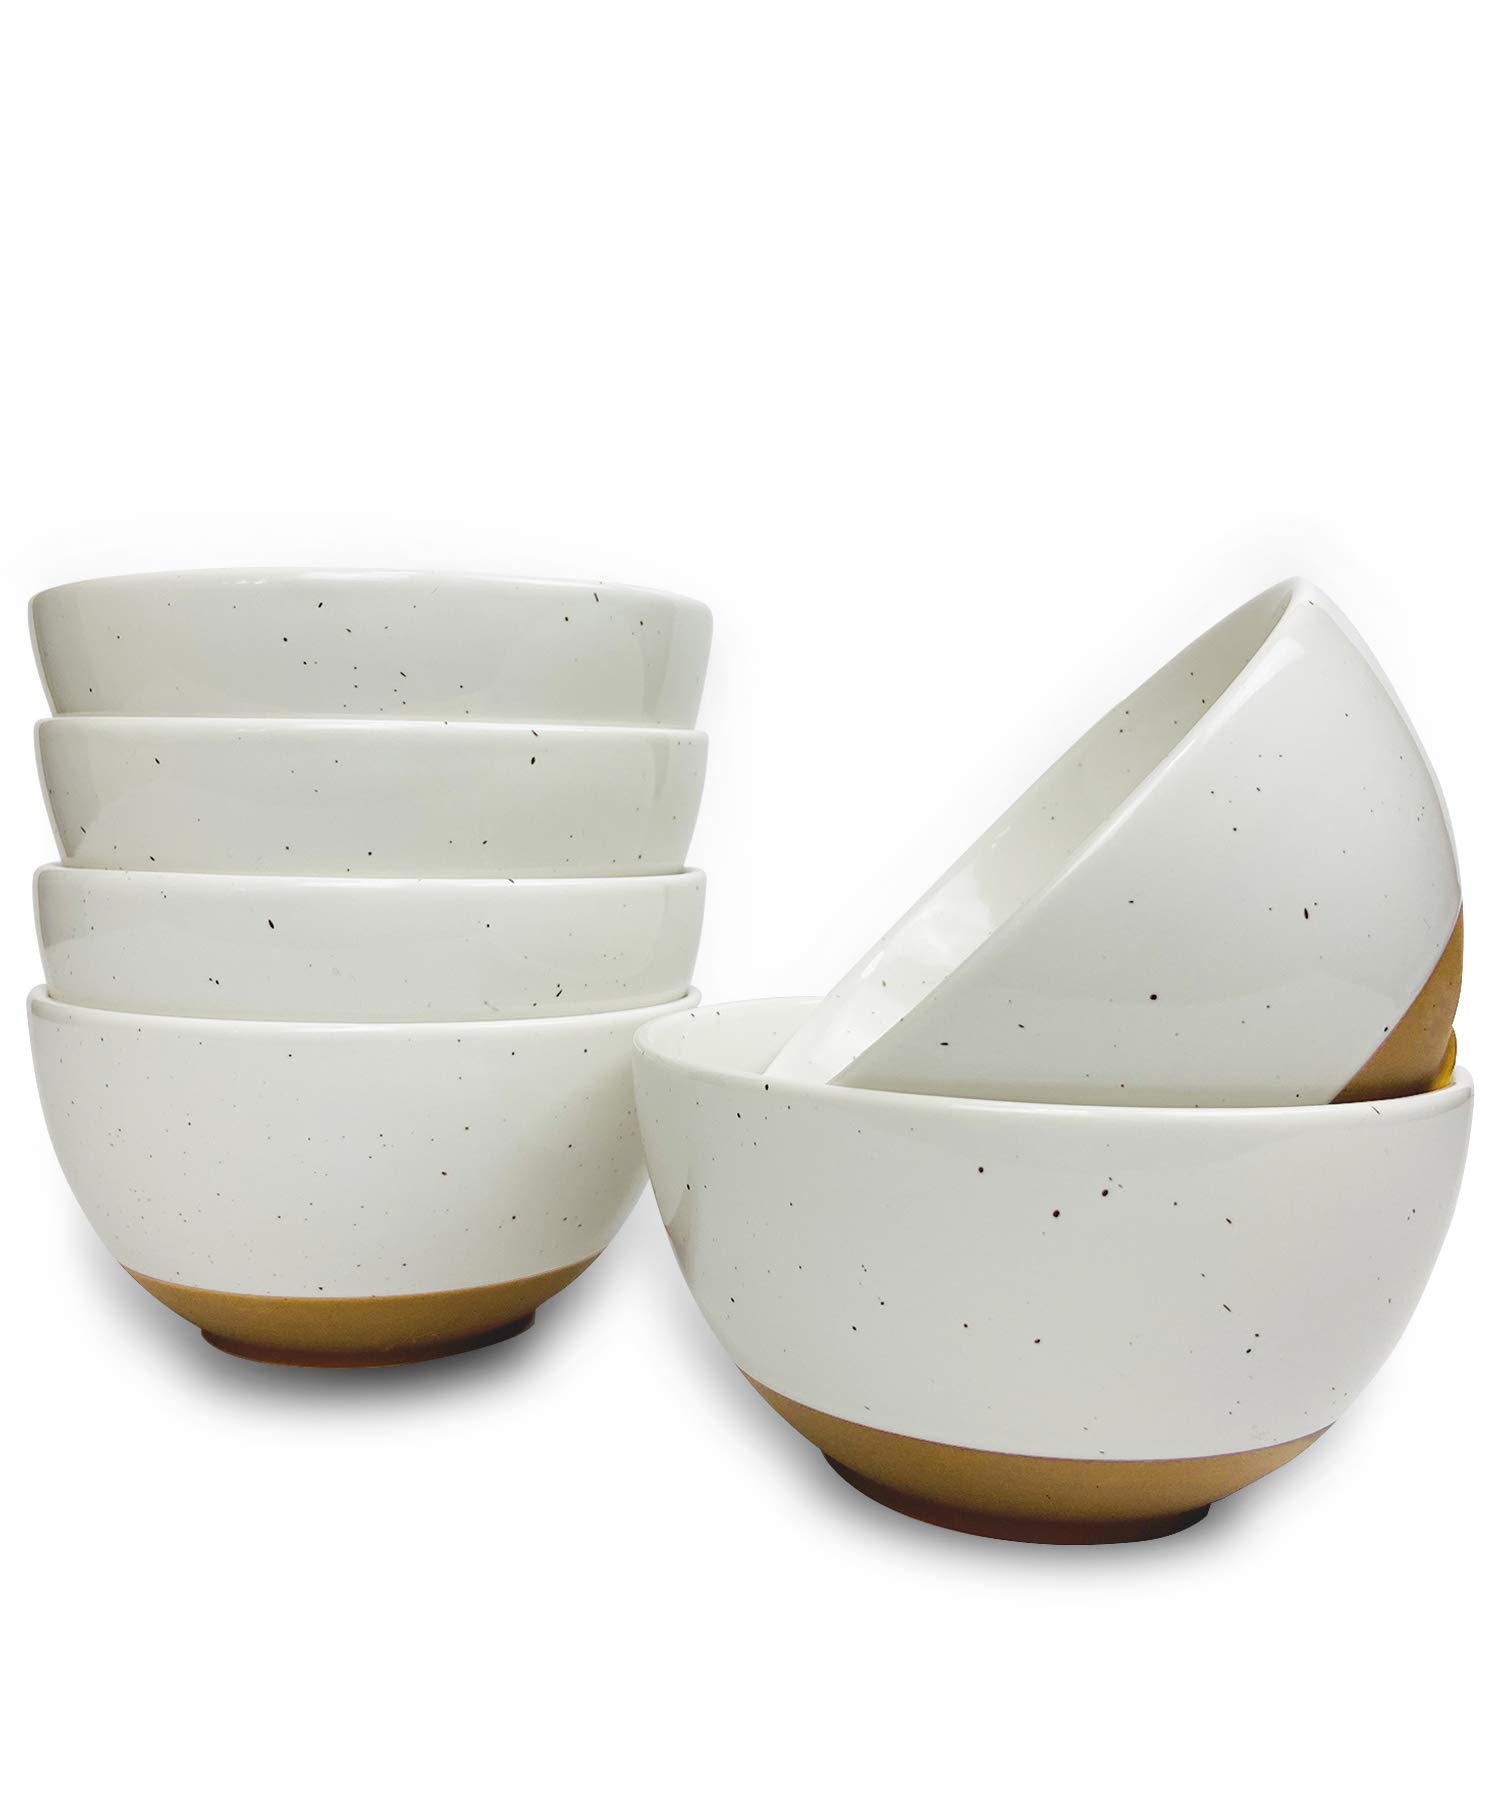 Mora Ceramic Small Dessert Bowls - 16oz, Set of 6 - Microwave, Oven and Dishwasher Safe, For Rice, Ice Cream, Soup, Snacks, Cereal, Chili, Side Dis...